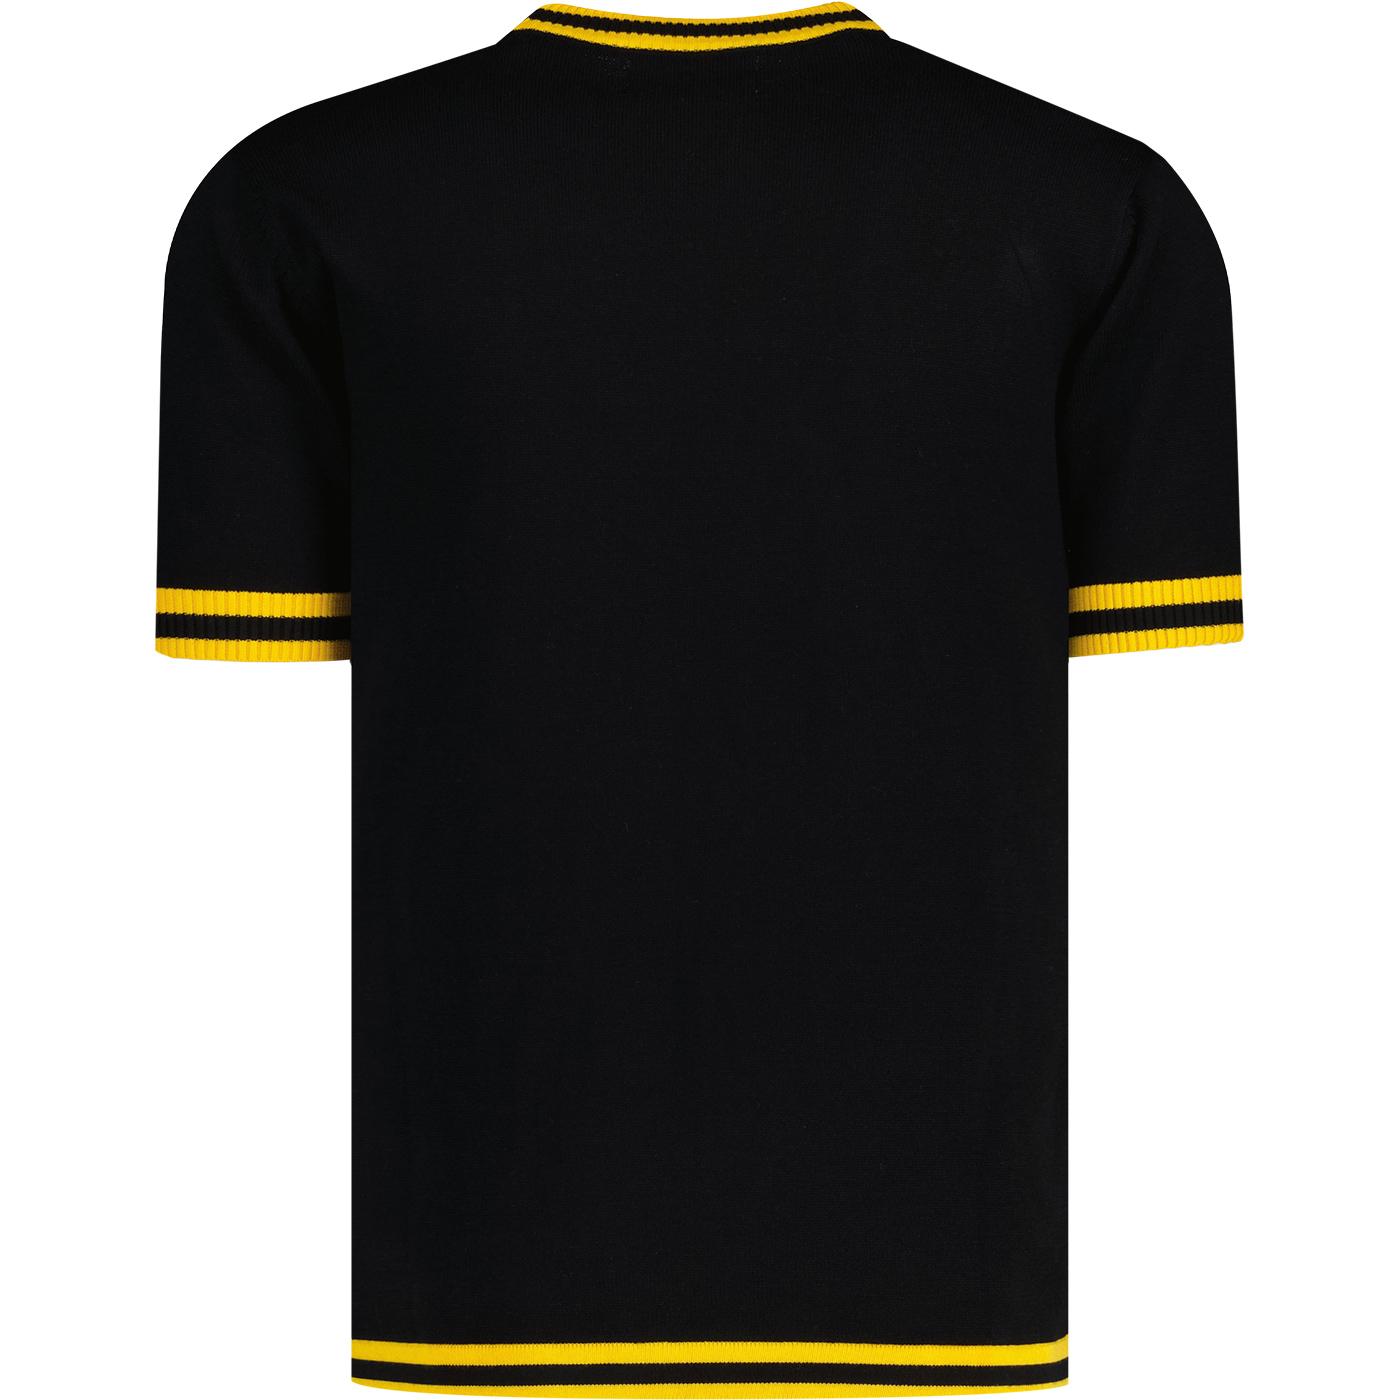 MADCAP ENGLAND Moon Mod Tipped Knit Tee in Black/Yellow